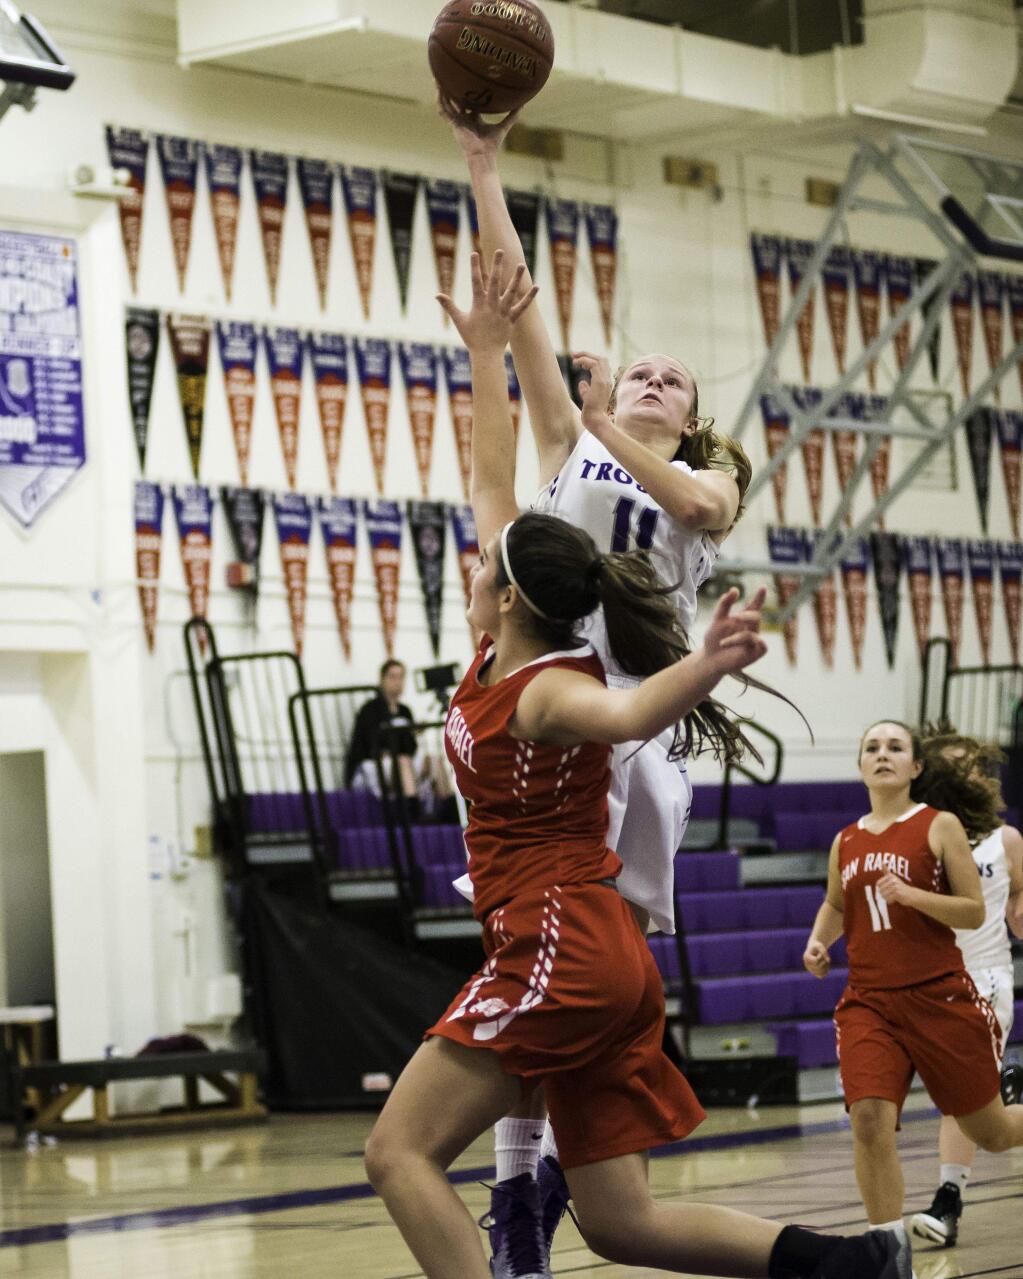 RICH LANGDON/FOR THE ARGUS-COURIERPetaluma's Nicole Costa rises above a San Rafael defender to score two of her game-high 14 points in the T-Girls victory.